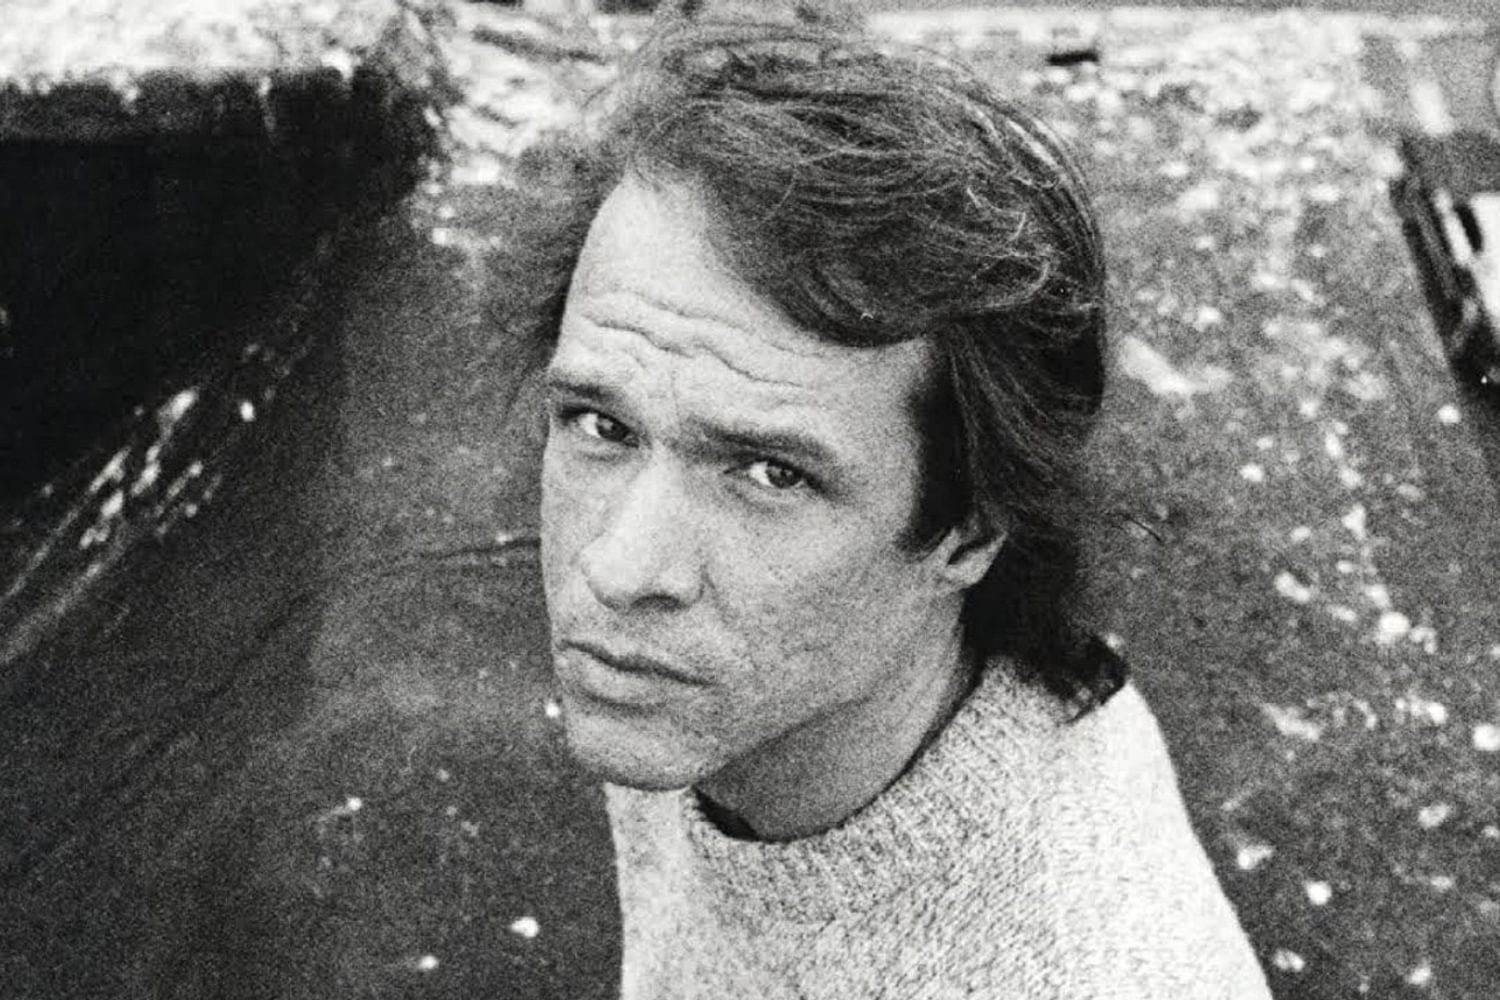 Red Hot: Arthur Russell's impact in 2014